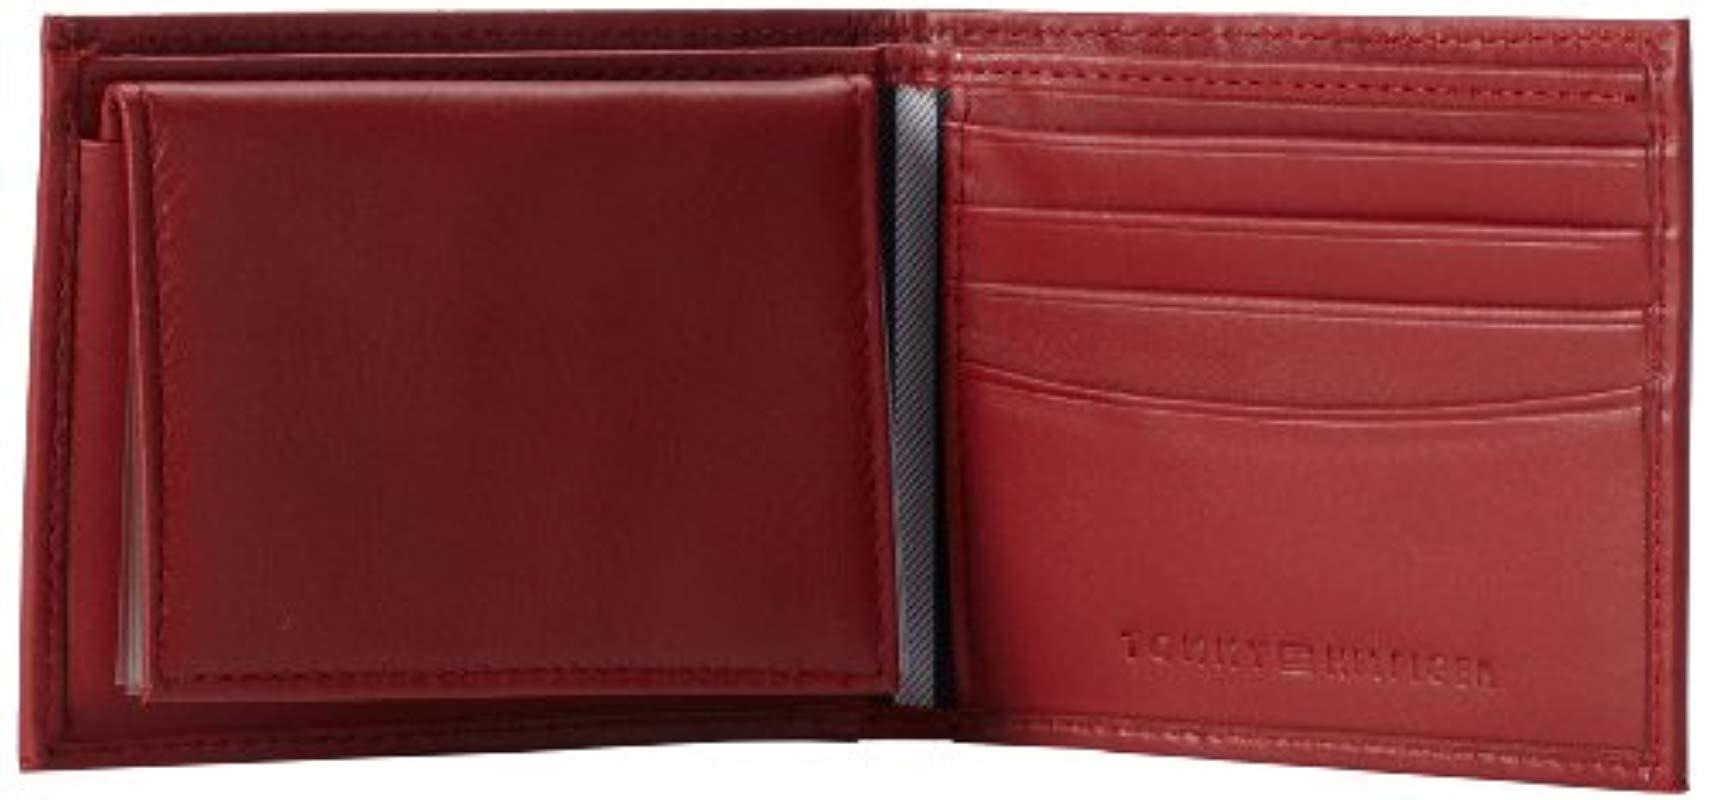 New Tommy Hilfiger Ranger Red Navy Leather Passcase Credit Cards Men's Wallet 